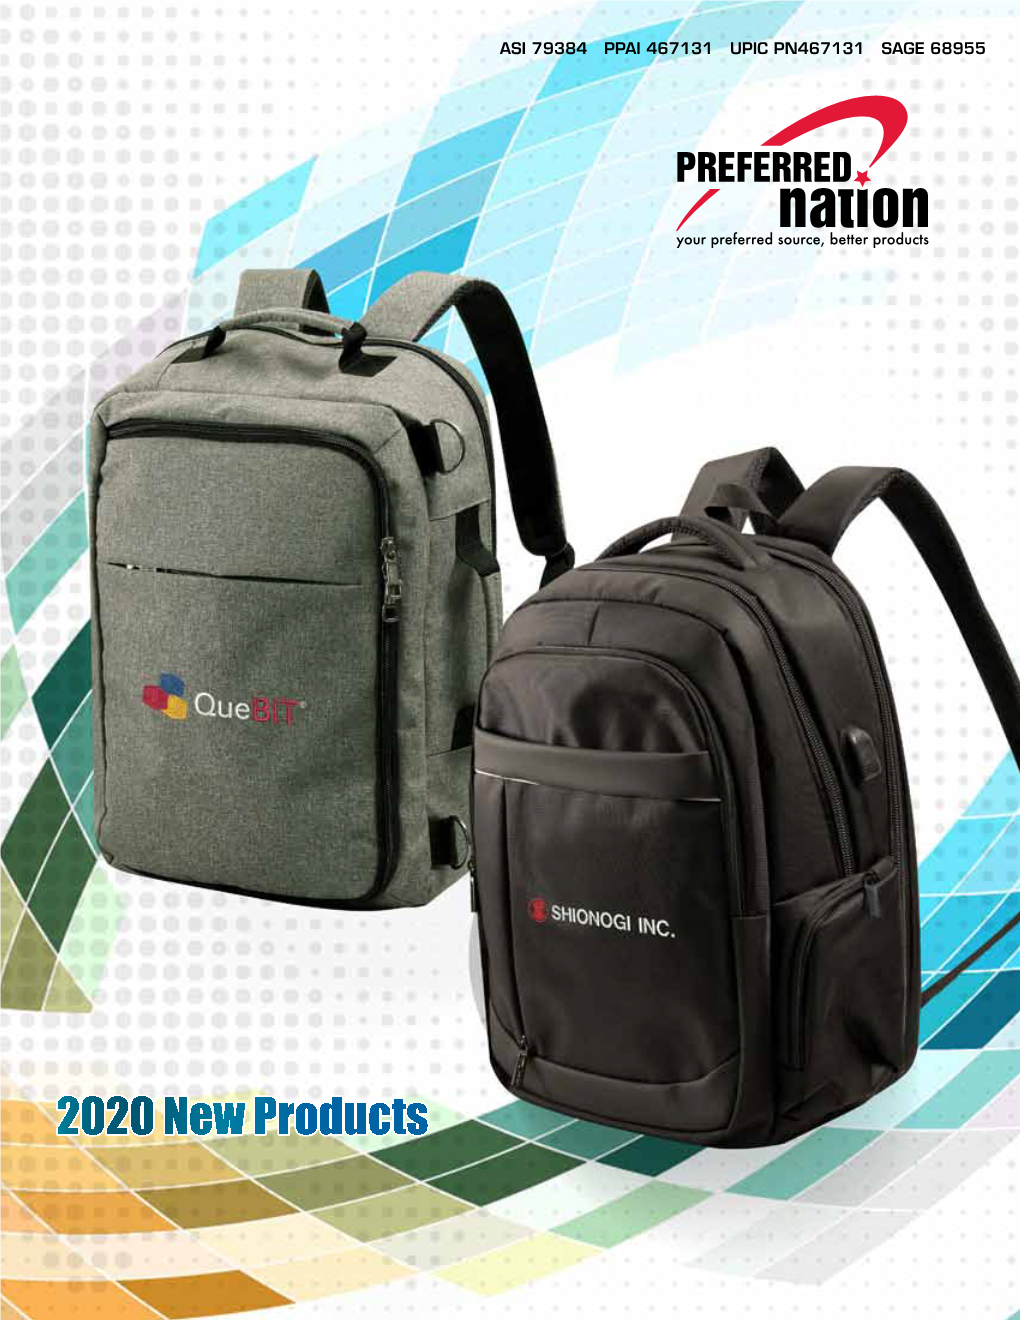 2020 New Products